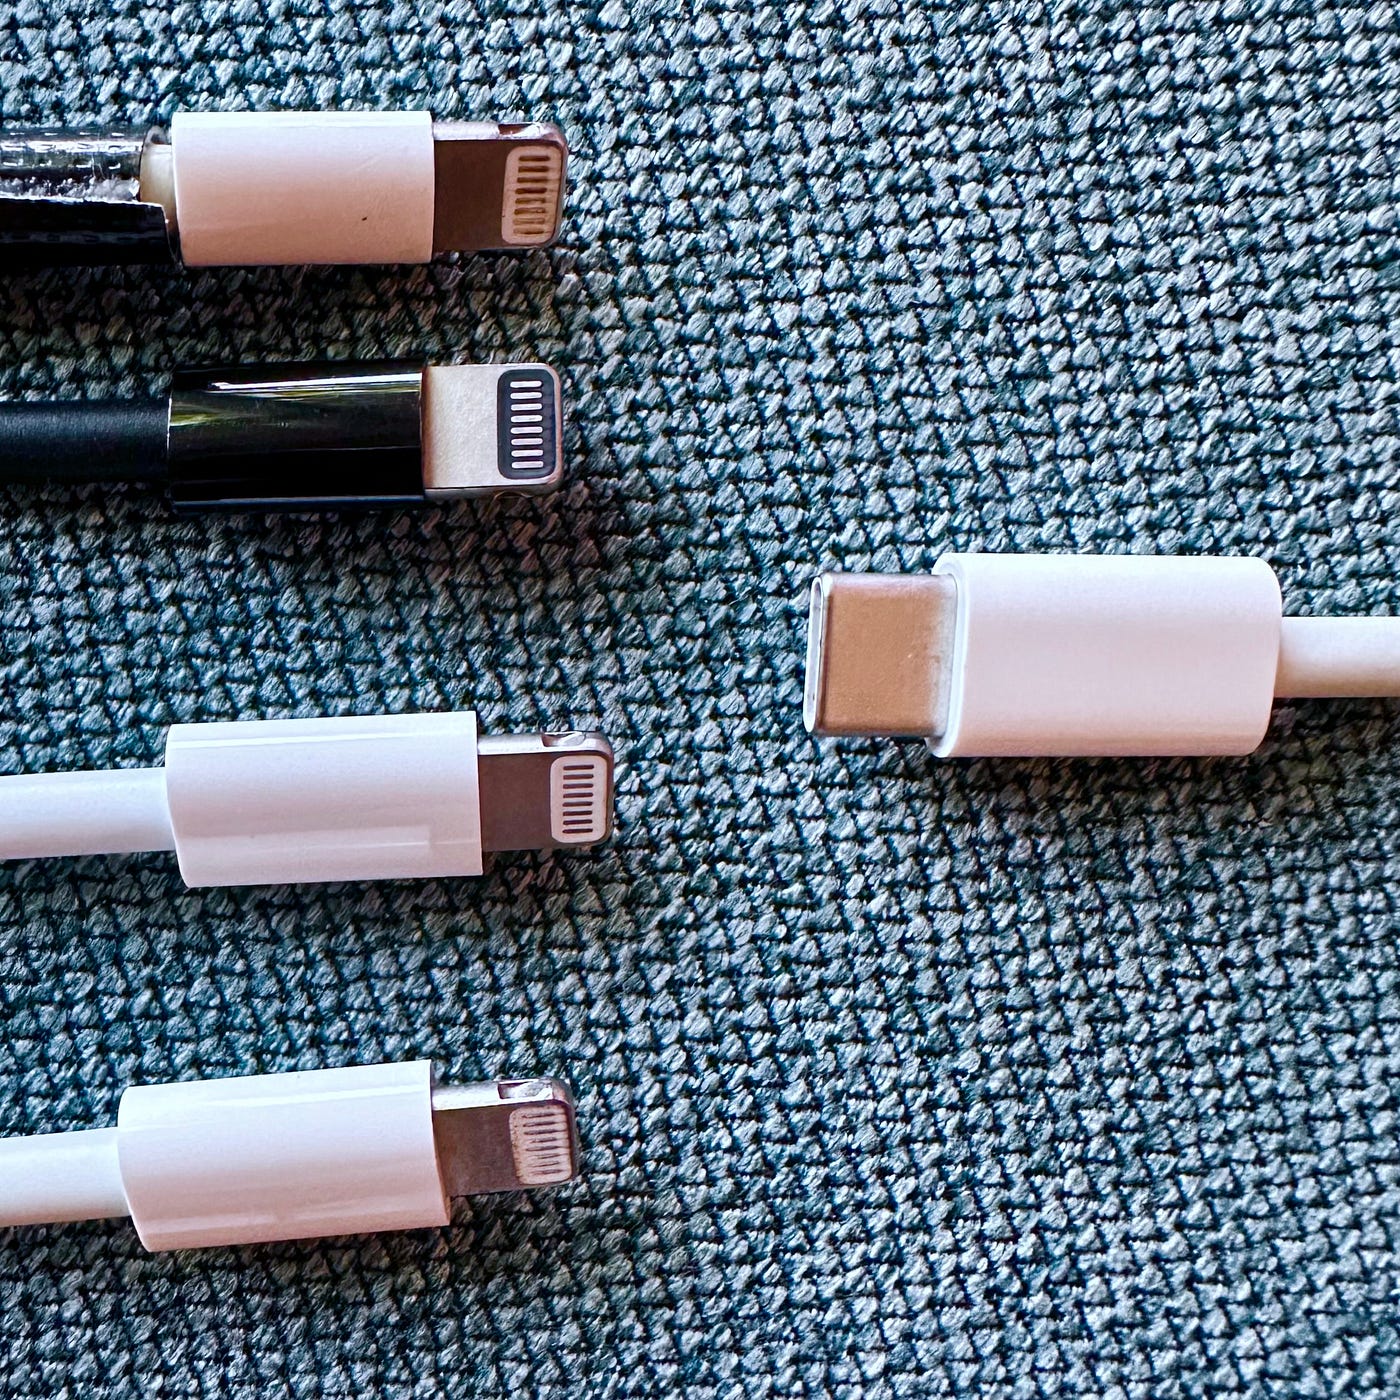 iPhone 15 USB-C charger replaces old Lightning cord. Why the change?